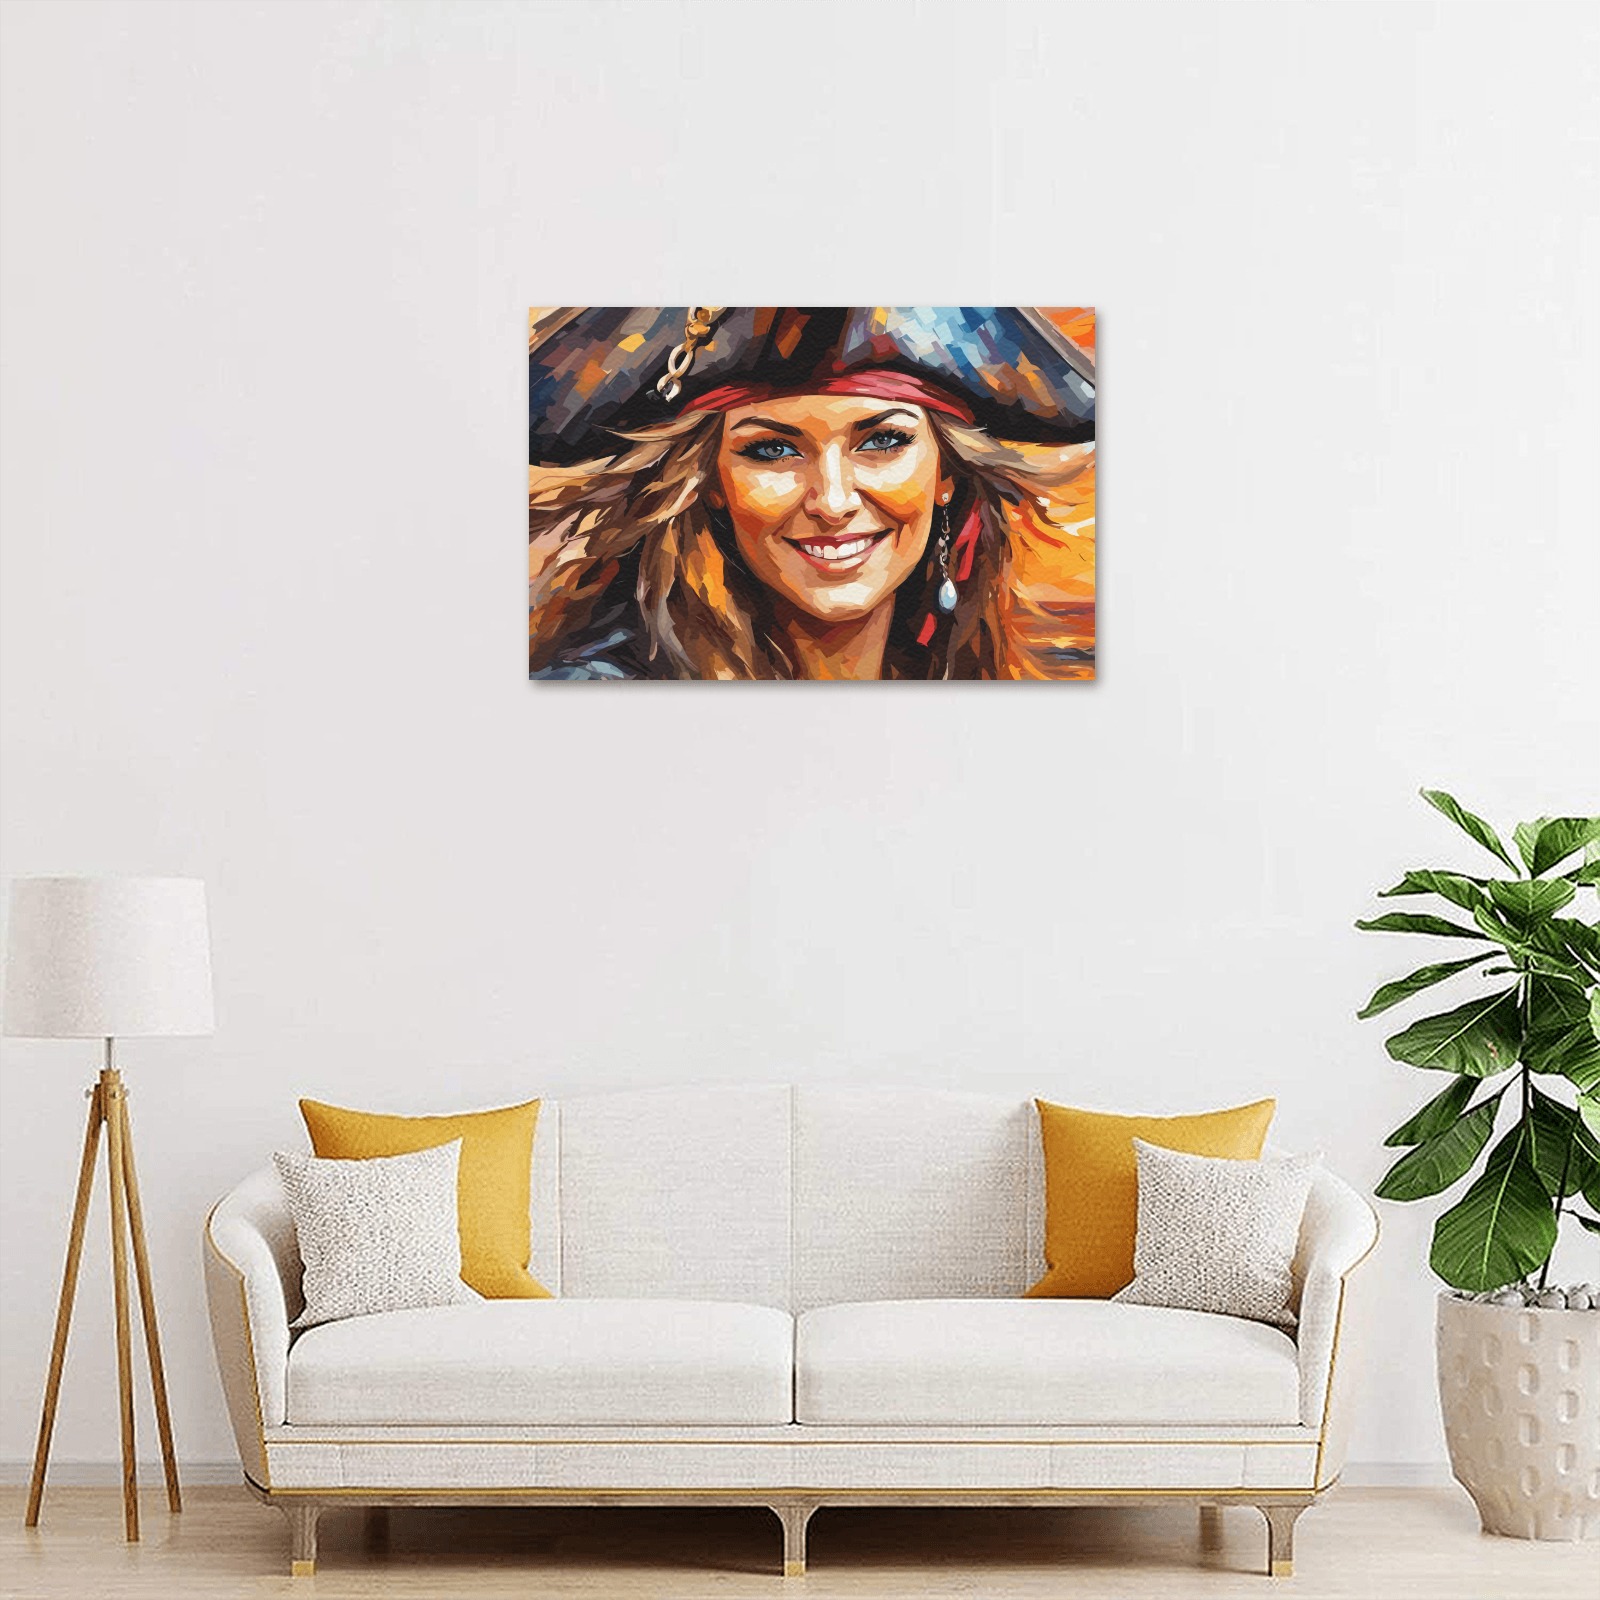 Charming adorable pirate lady at peaceful sunset. Upgraded Canvas Print 18"x12"